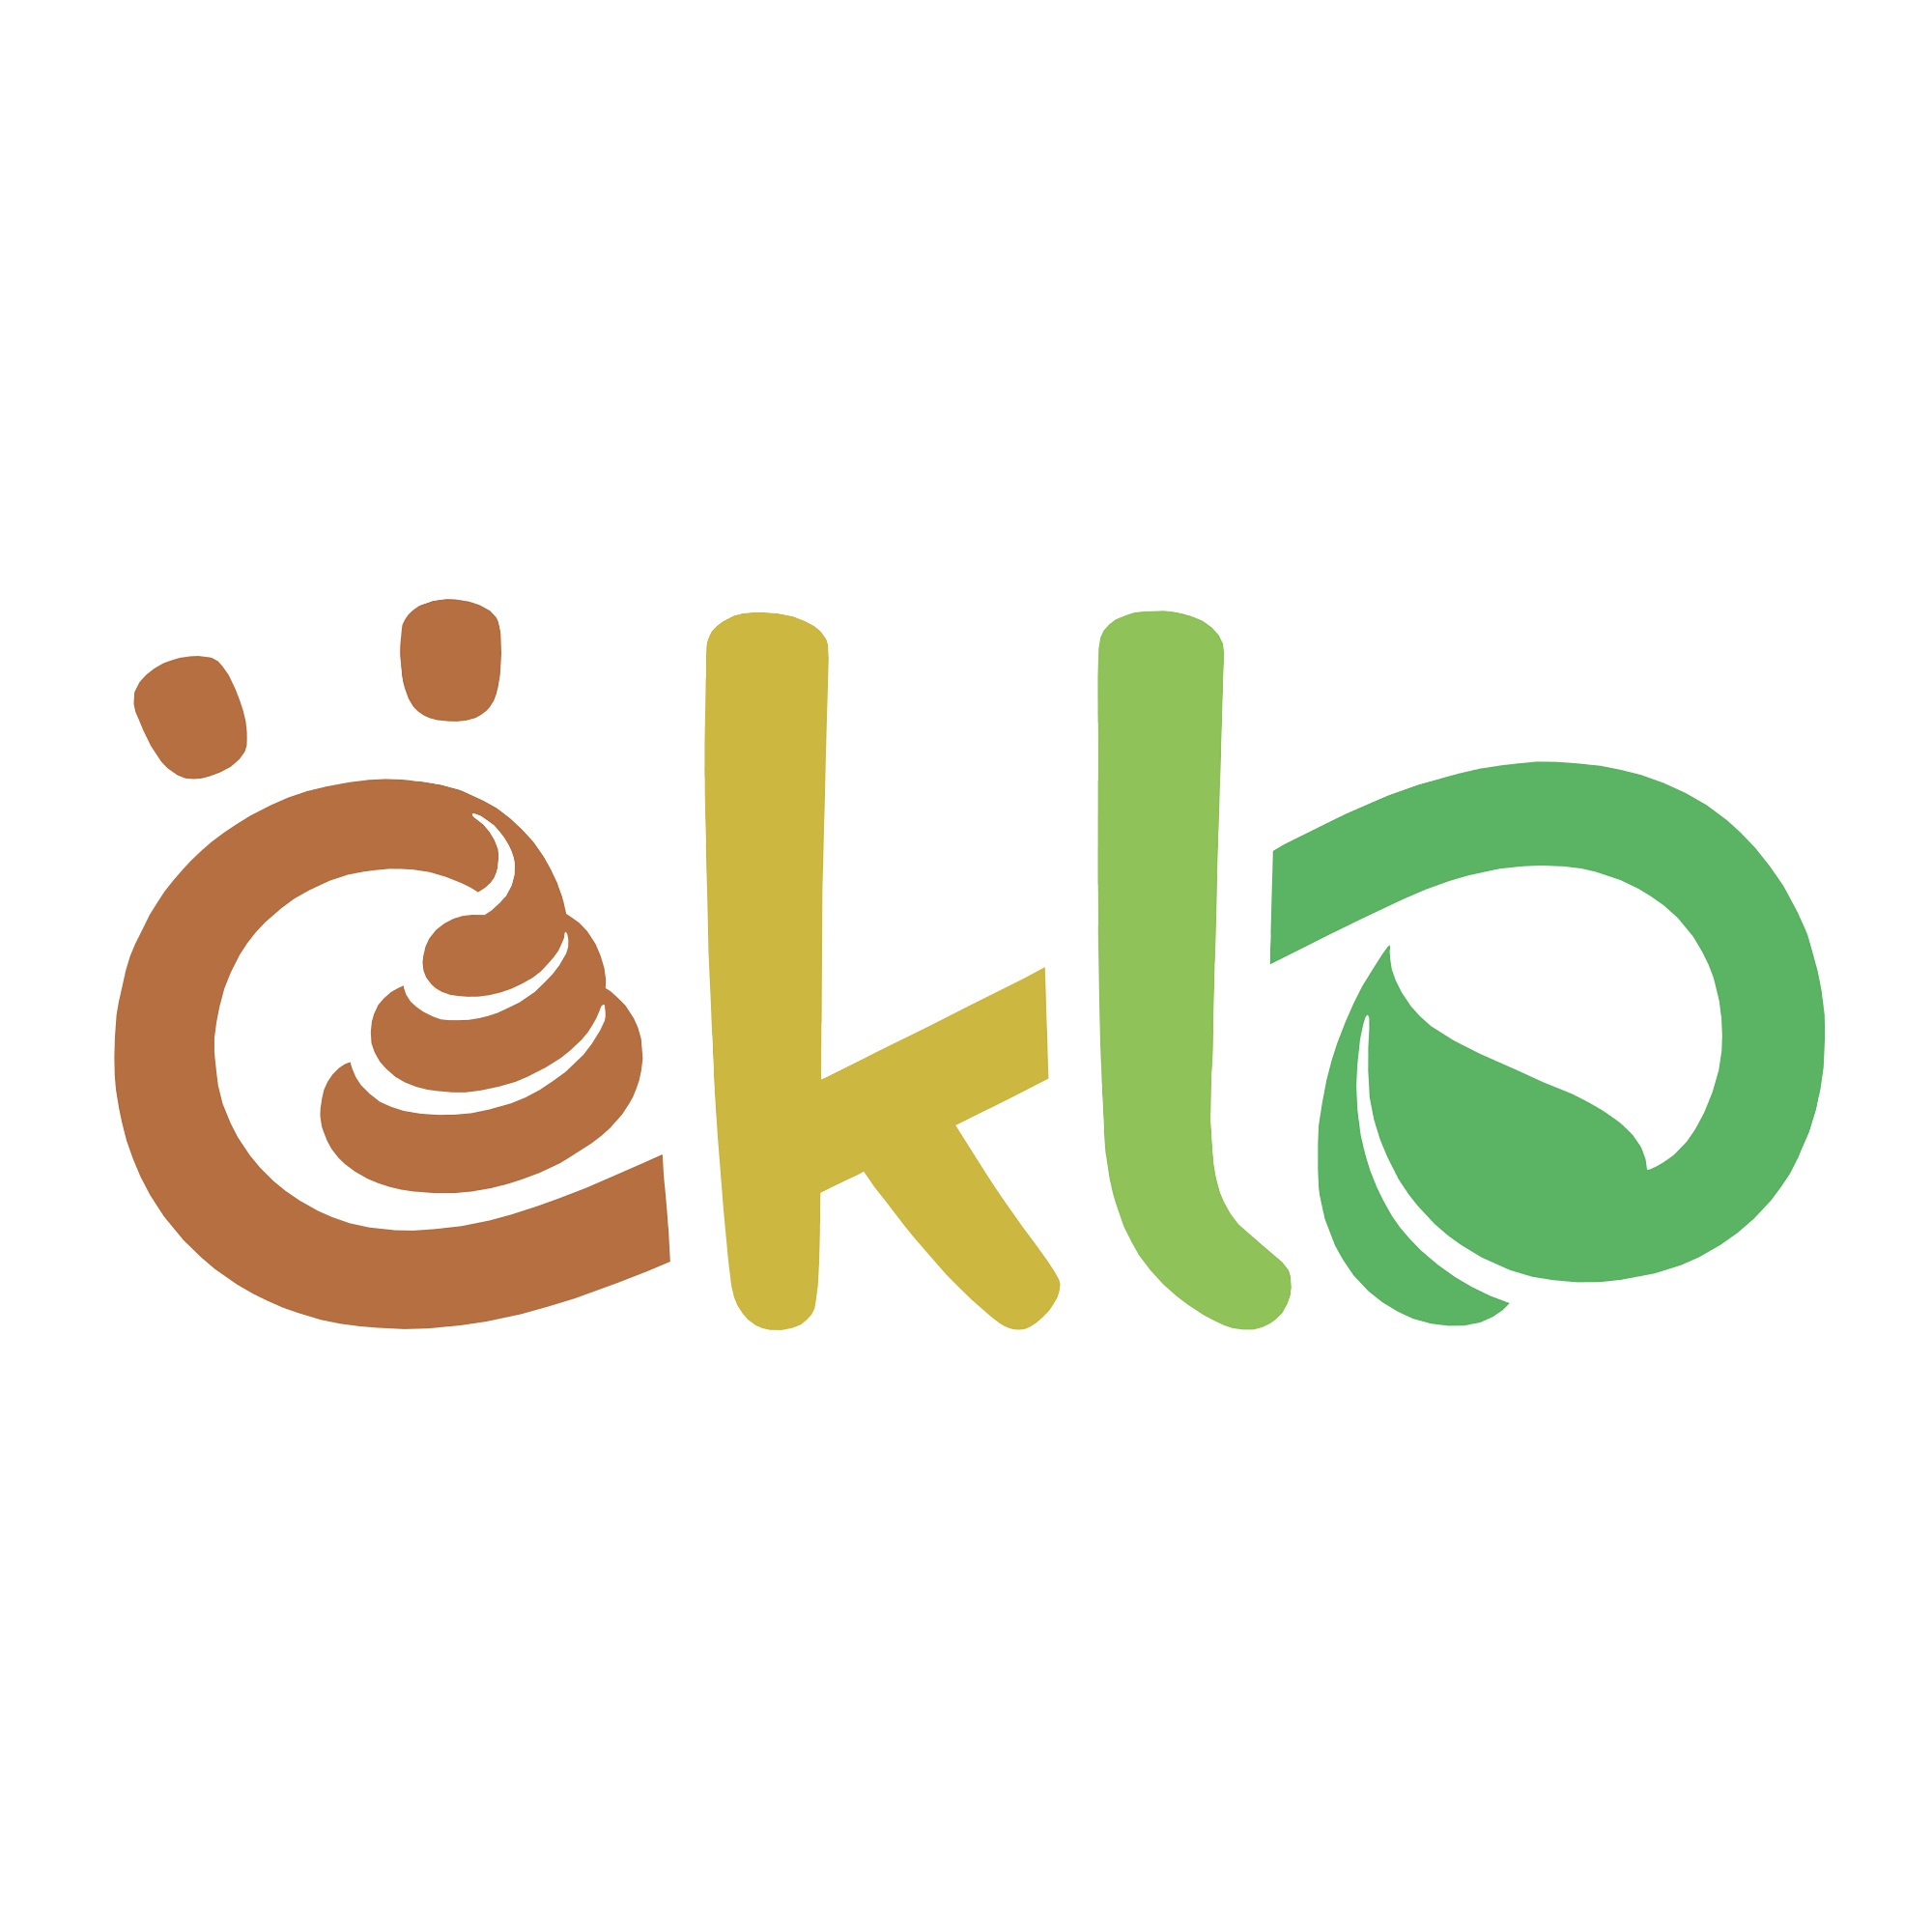 öklo.at